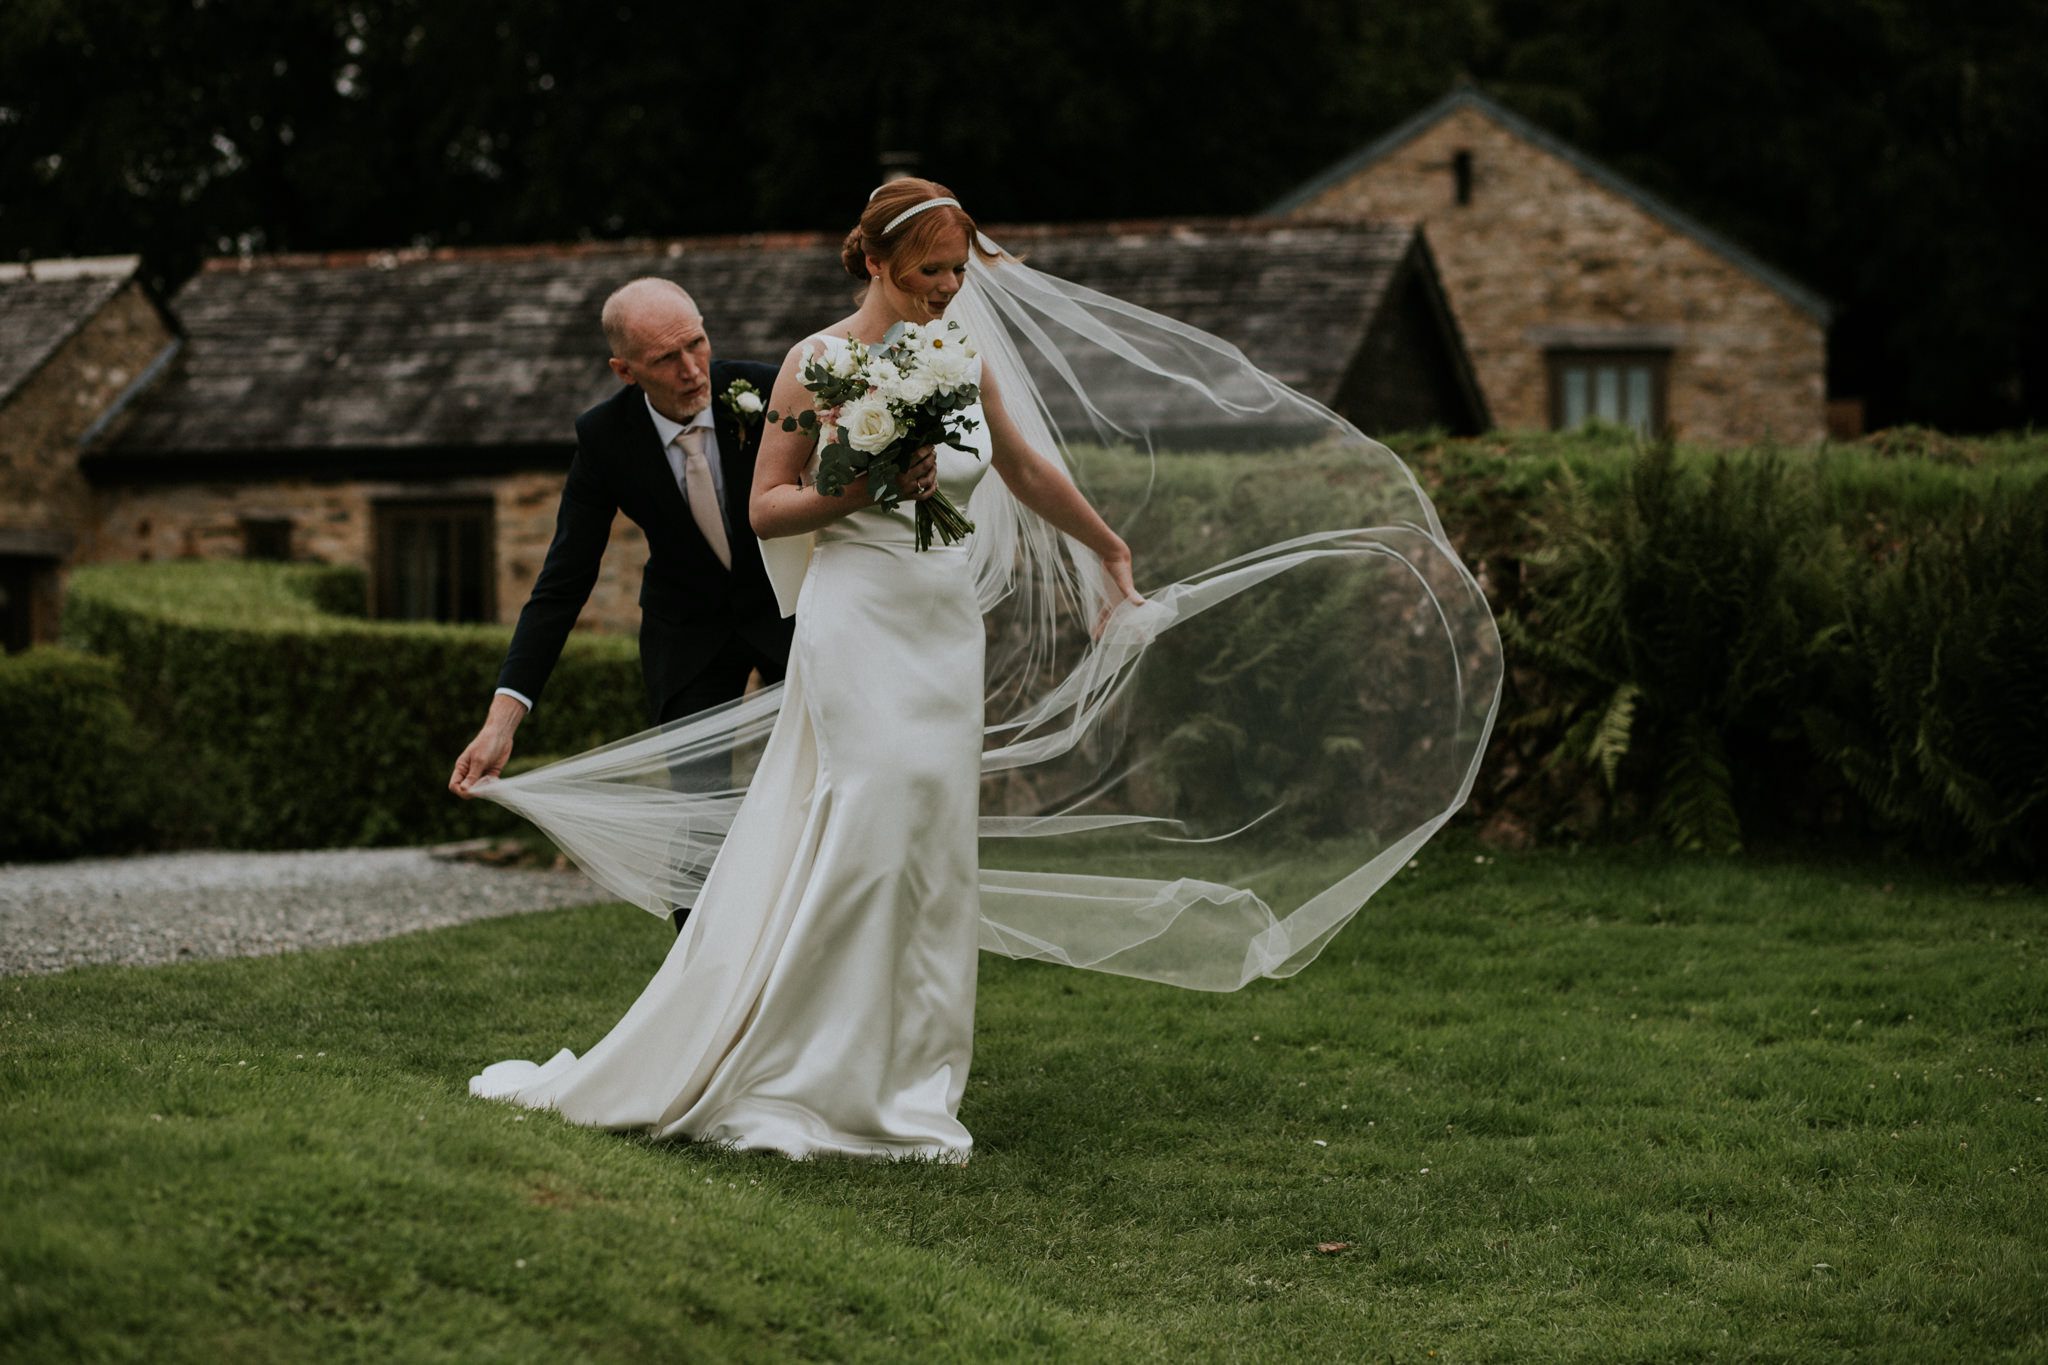 The brides father adjusts her veil in the wind at a wedding ceremony at Trevenna Barns in Cornwall